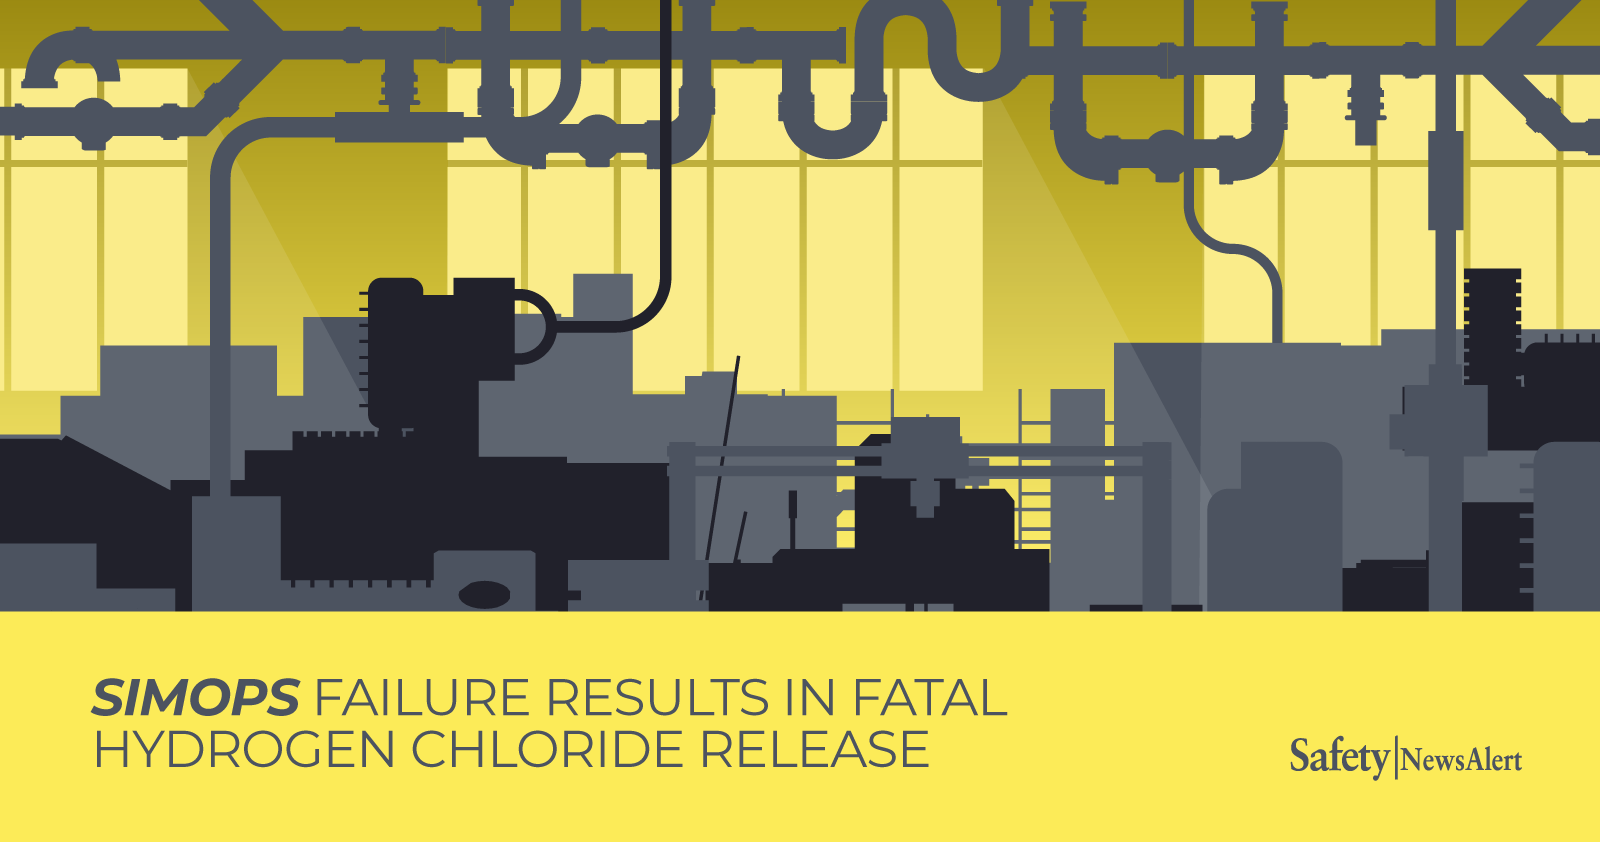 SIMOPs failure results in fatal hydrogen chloride release